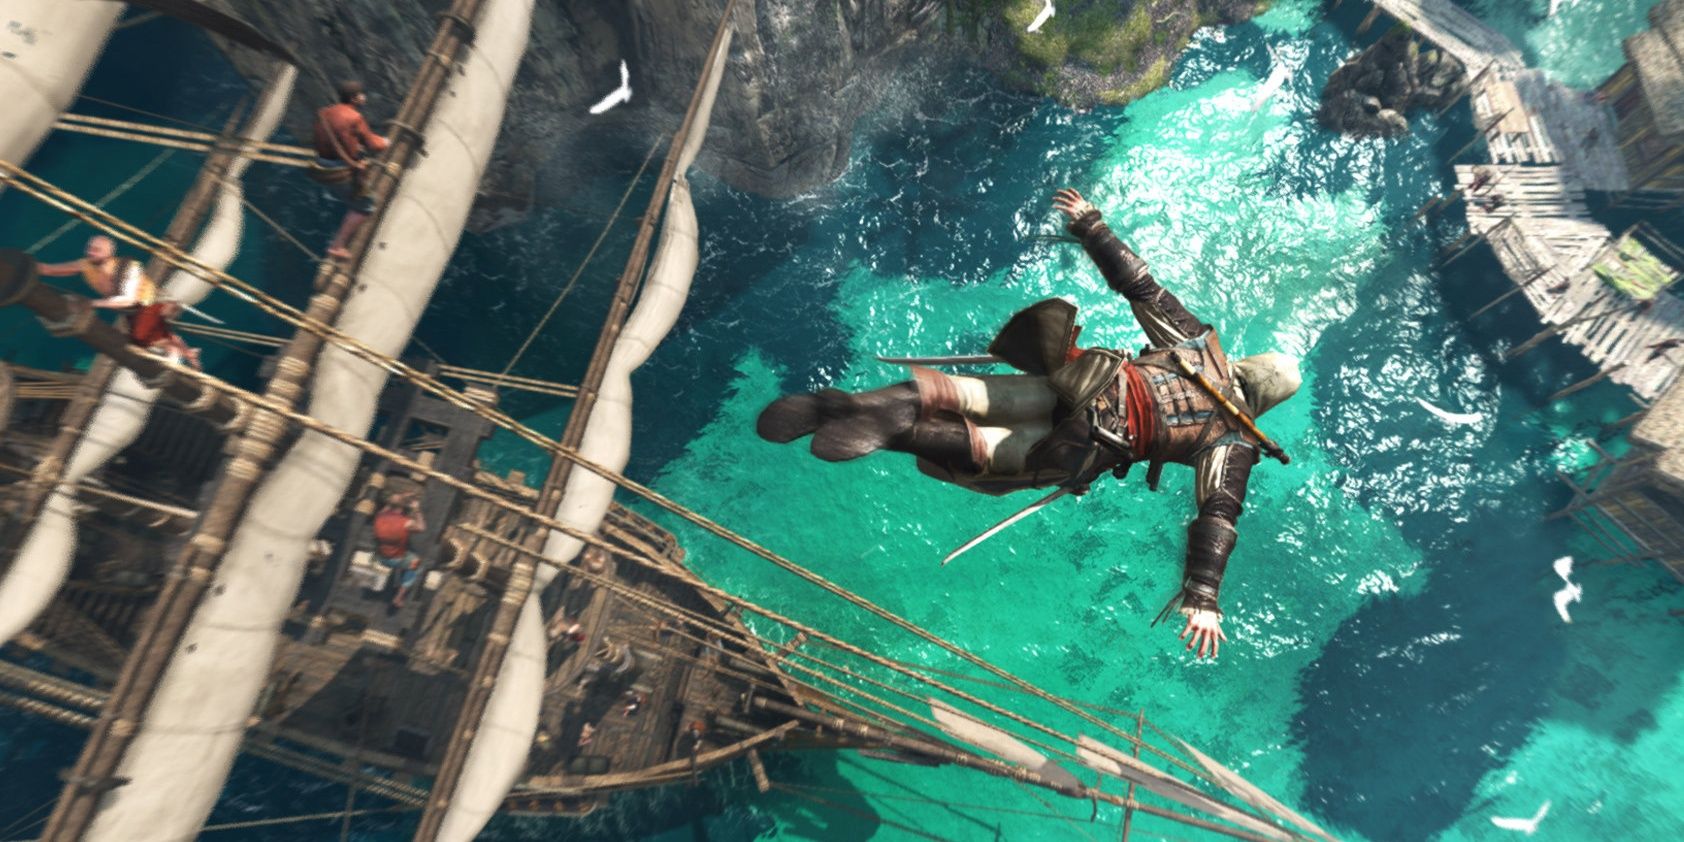 Edward Kenway in Assassin's Creed 4: Black Flag